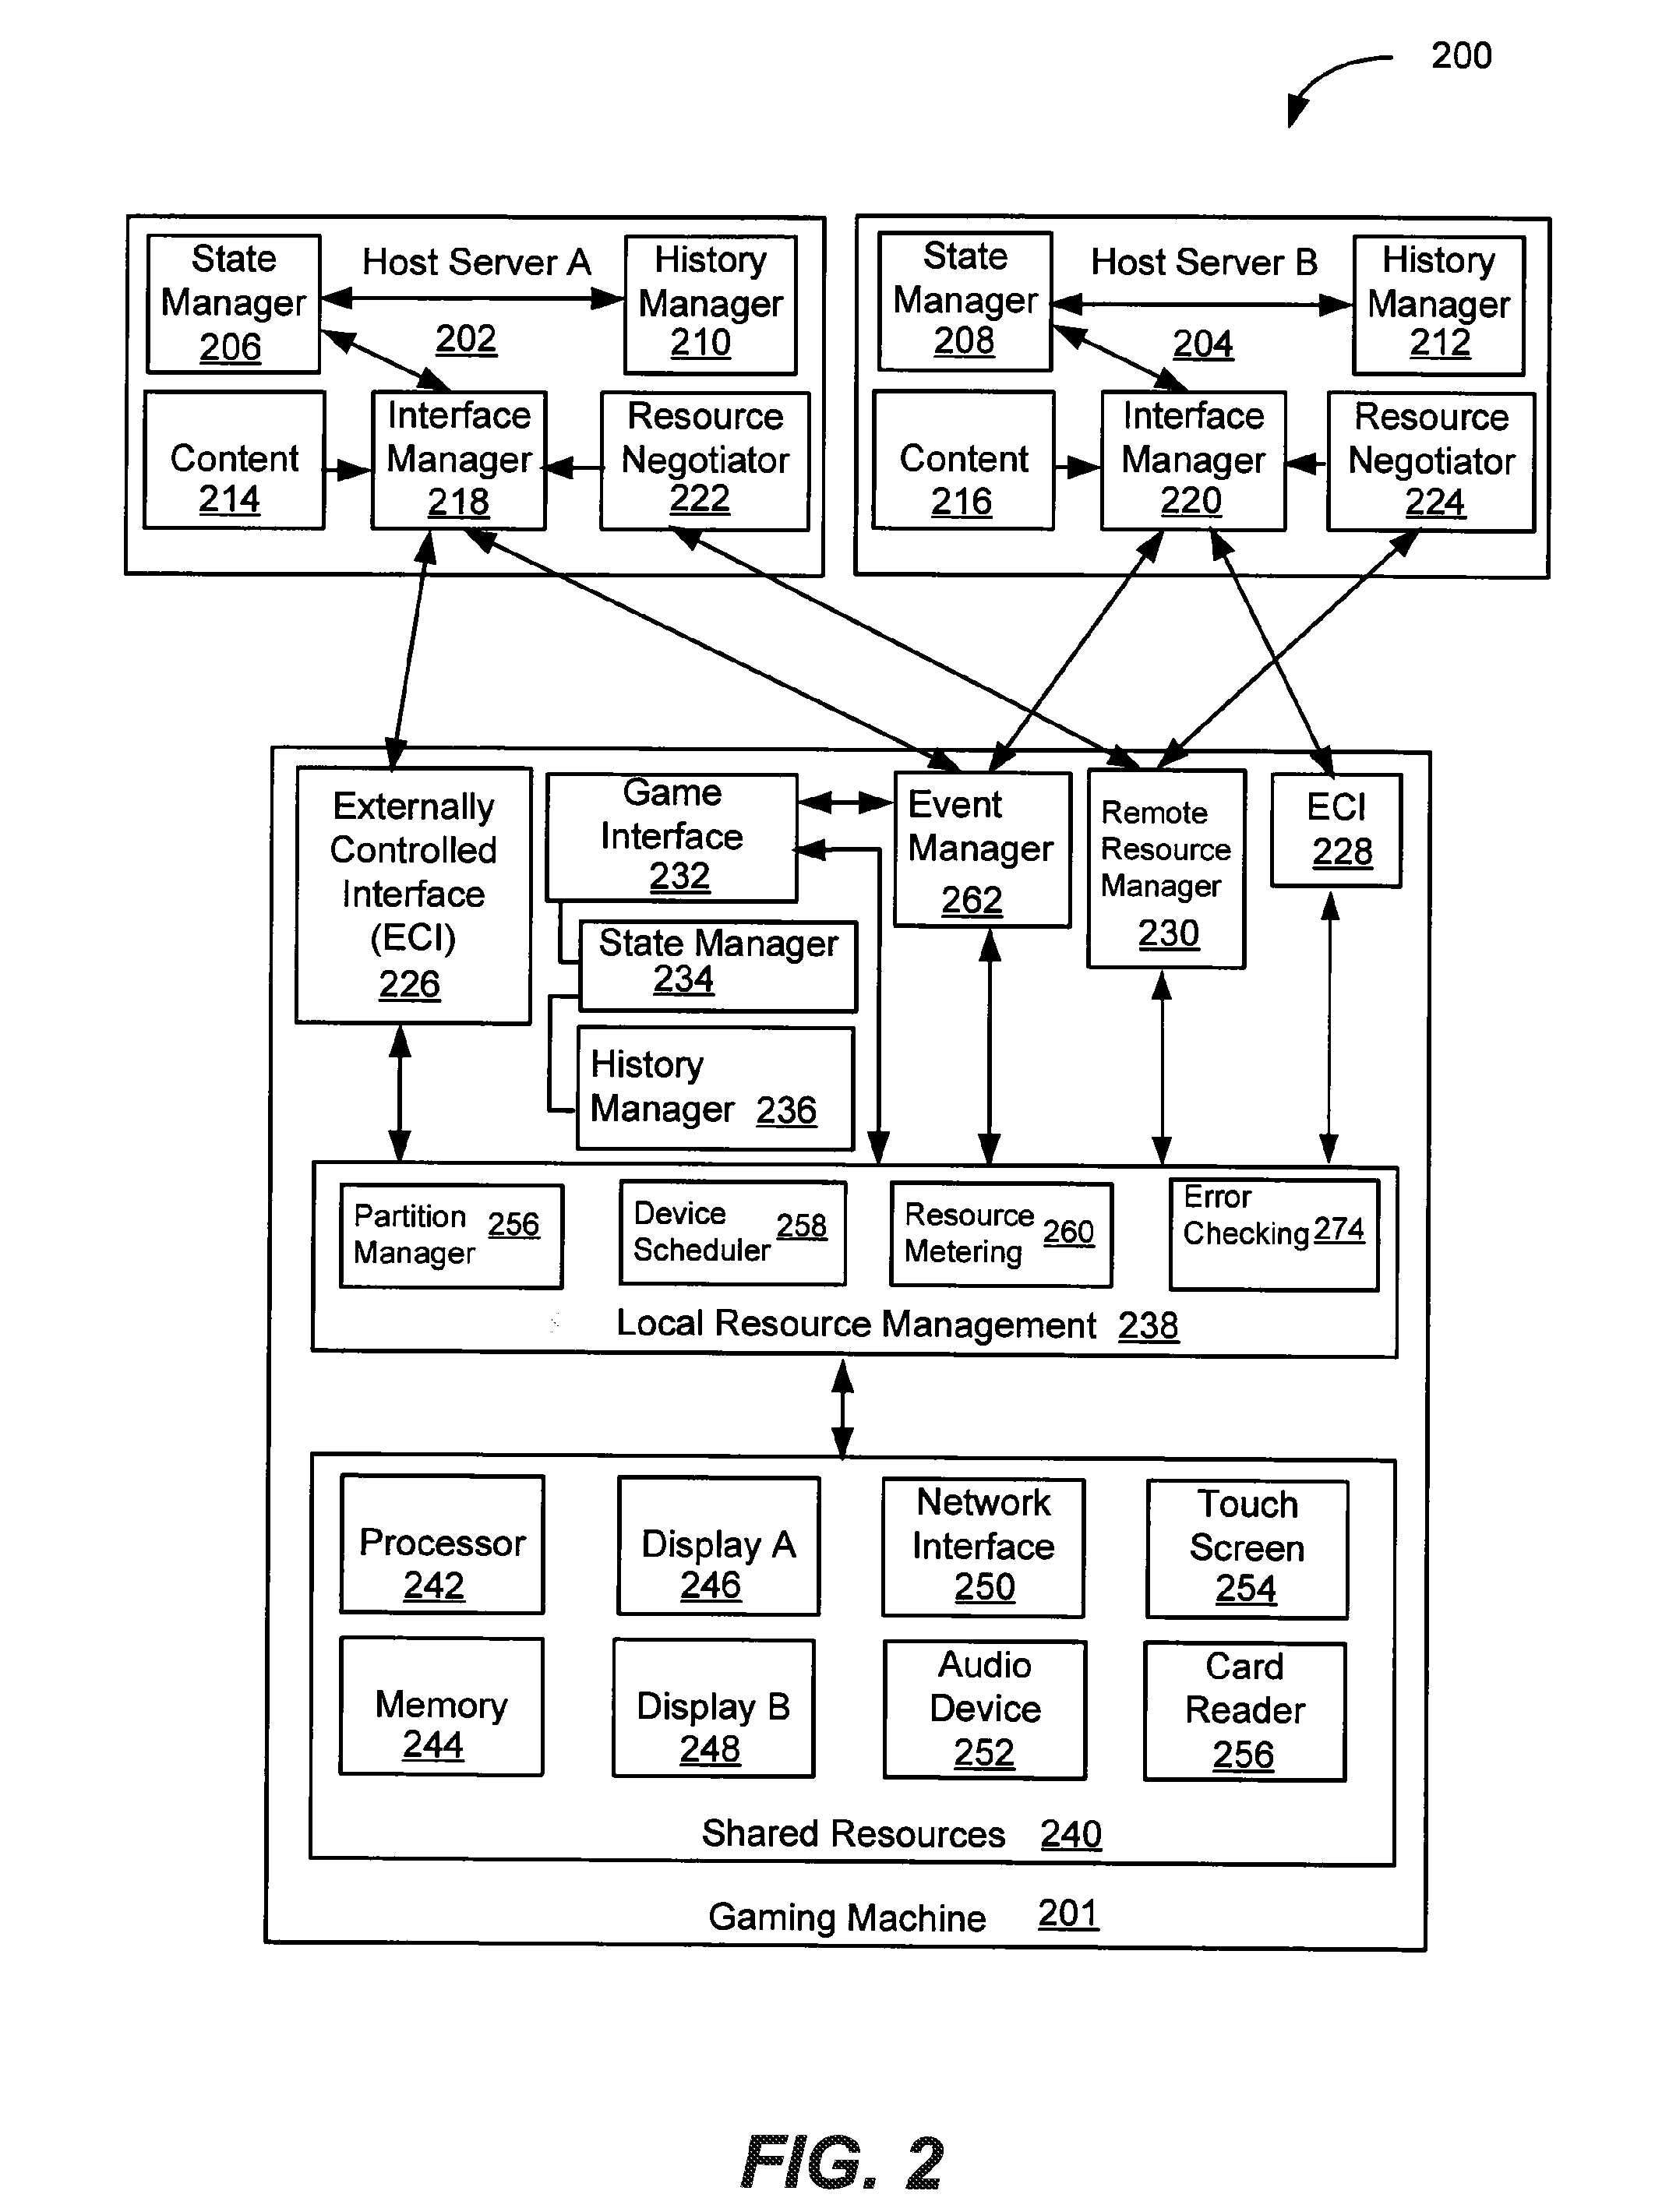 Methods and systems for tracking an event of an externally controlled interface